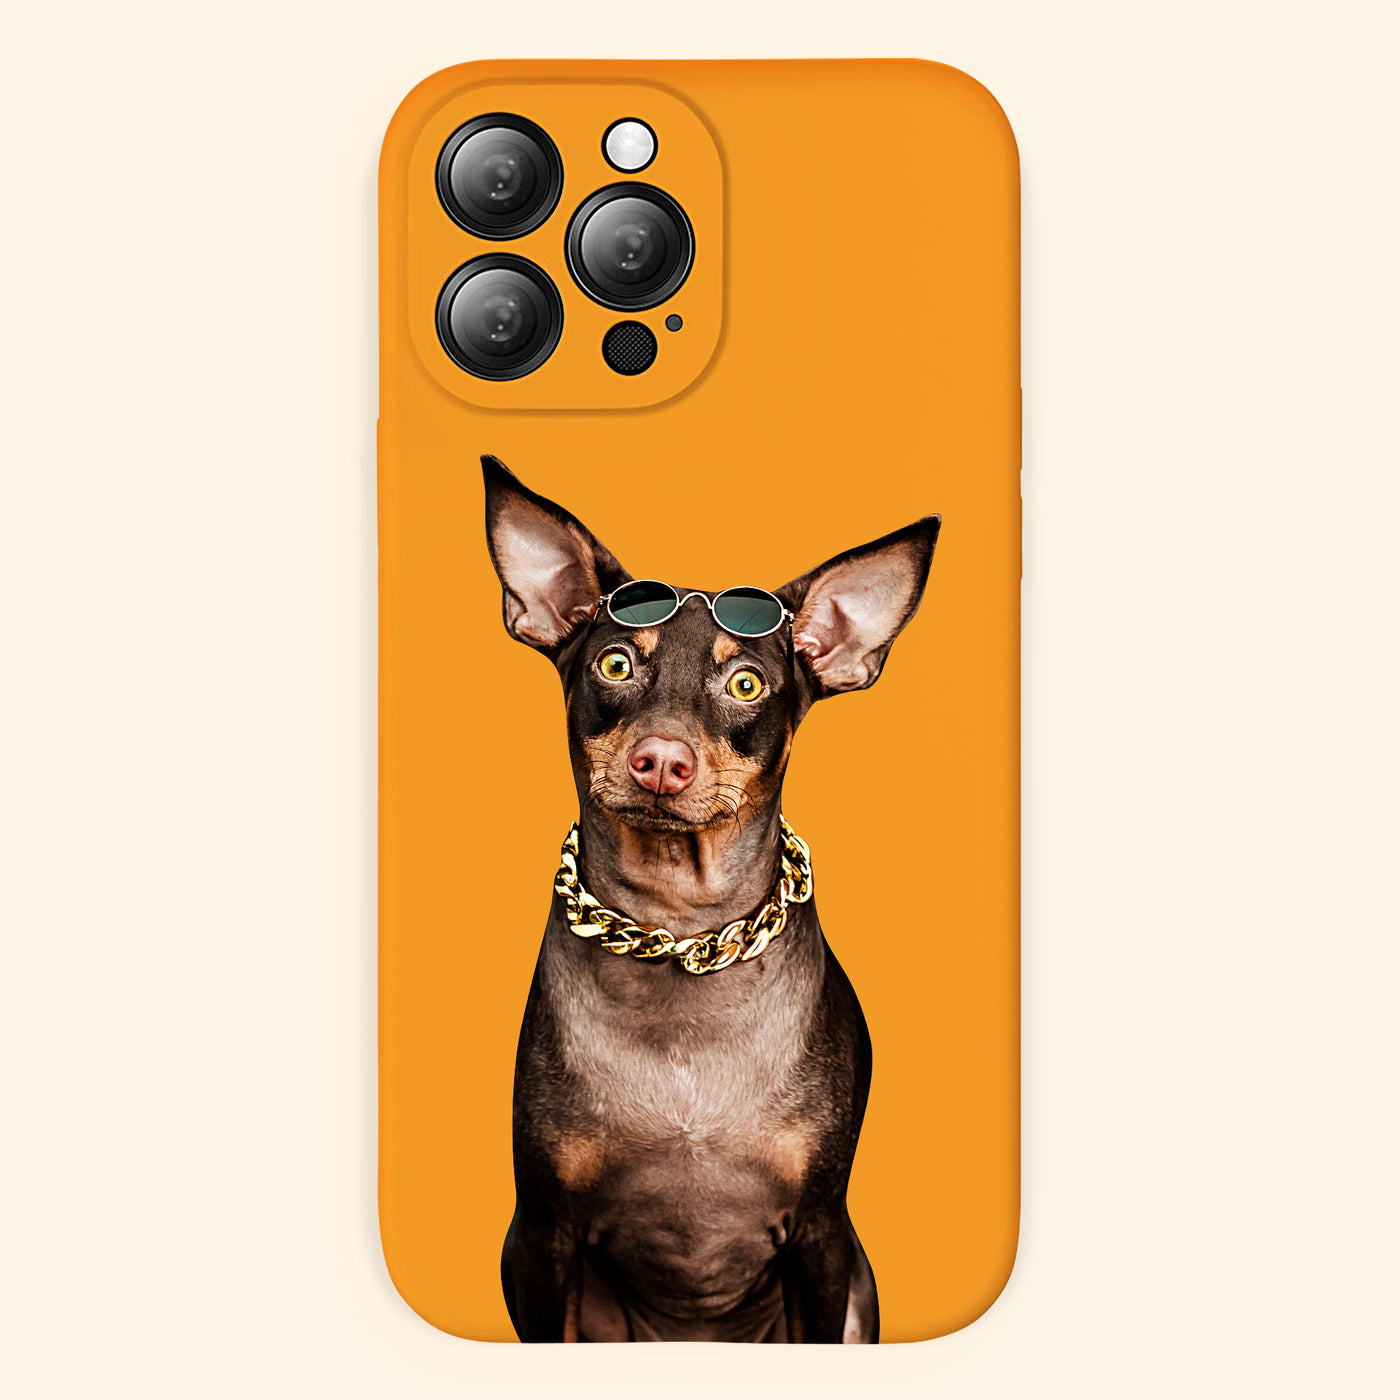 Personalized Pet Portrait Phone Case from Original Photo for Pet Lovers - The Pet Pillow